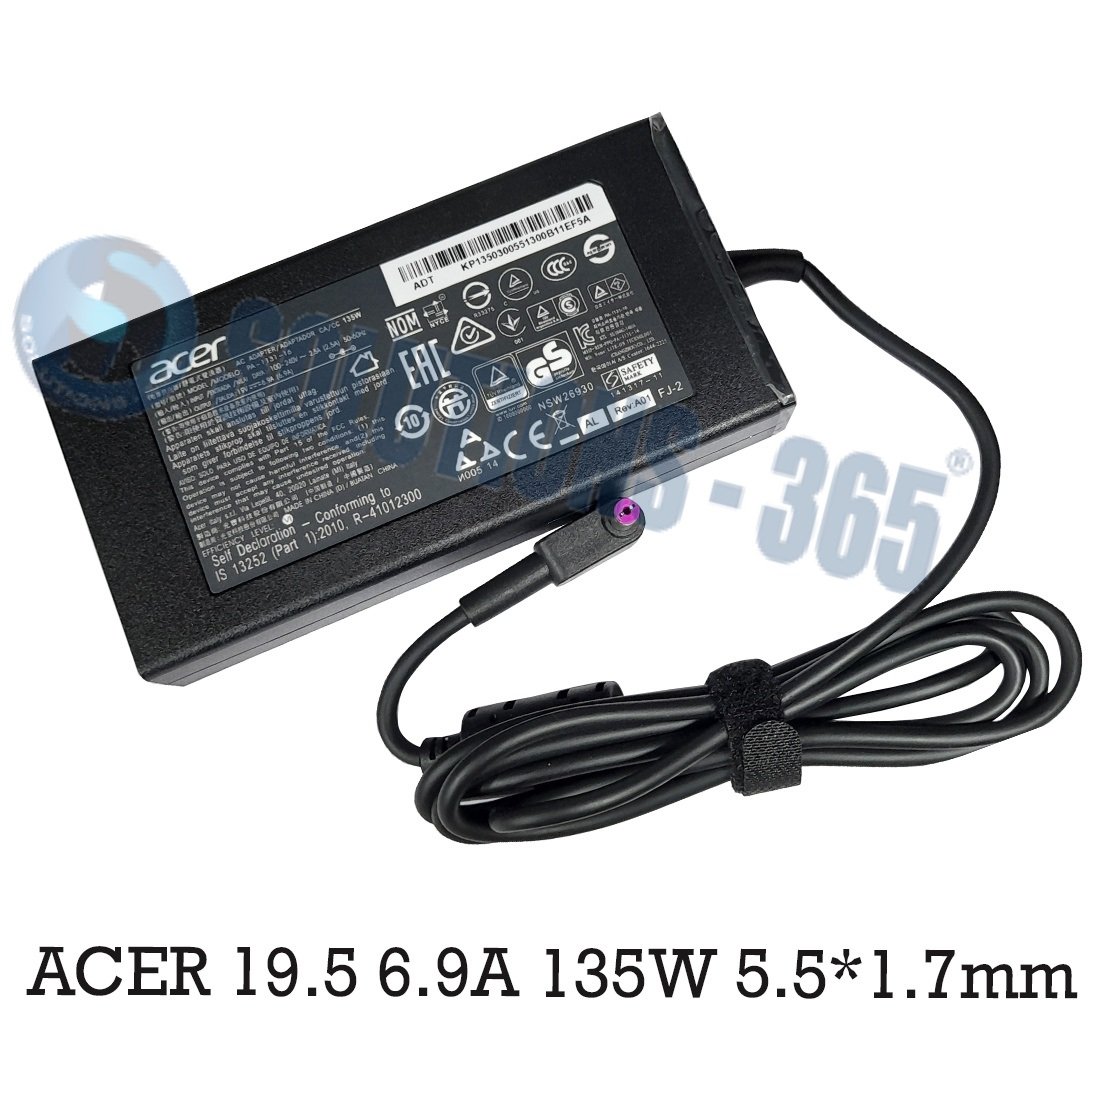 ACER 135W 5.5mm X 1.7mm Adapter